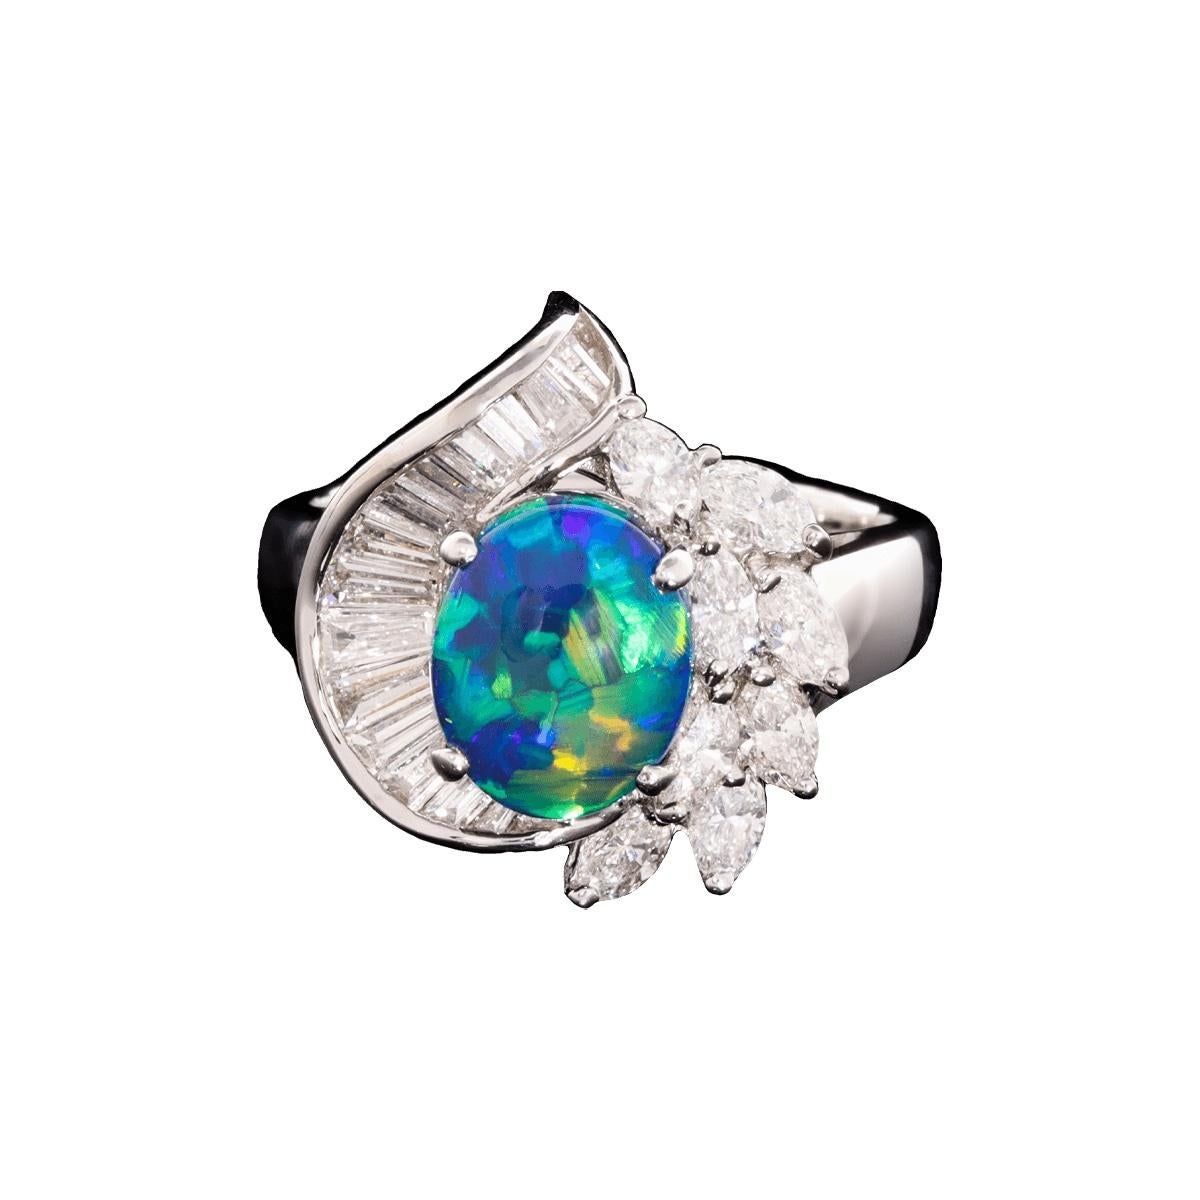 High cabochon Black Opal is already seldom found, but one with such rich colours and pattern is on another level. Then we surrounded it in almost 1.50ct of beautiful brilliant white diamonds.

Undoubtedly, this ring will be admired by all who see